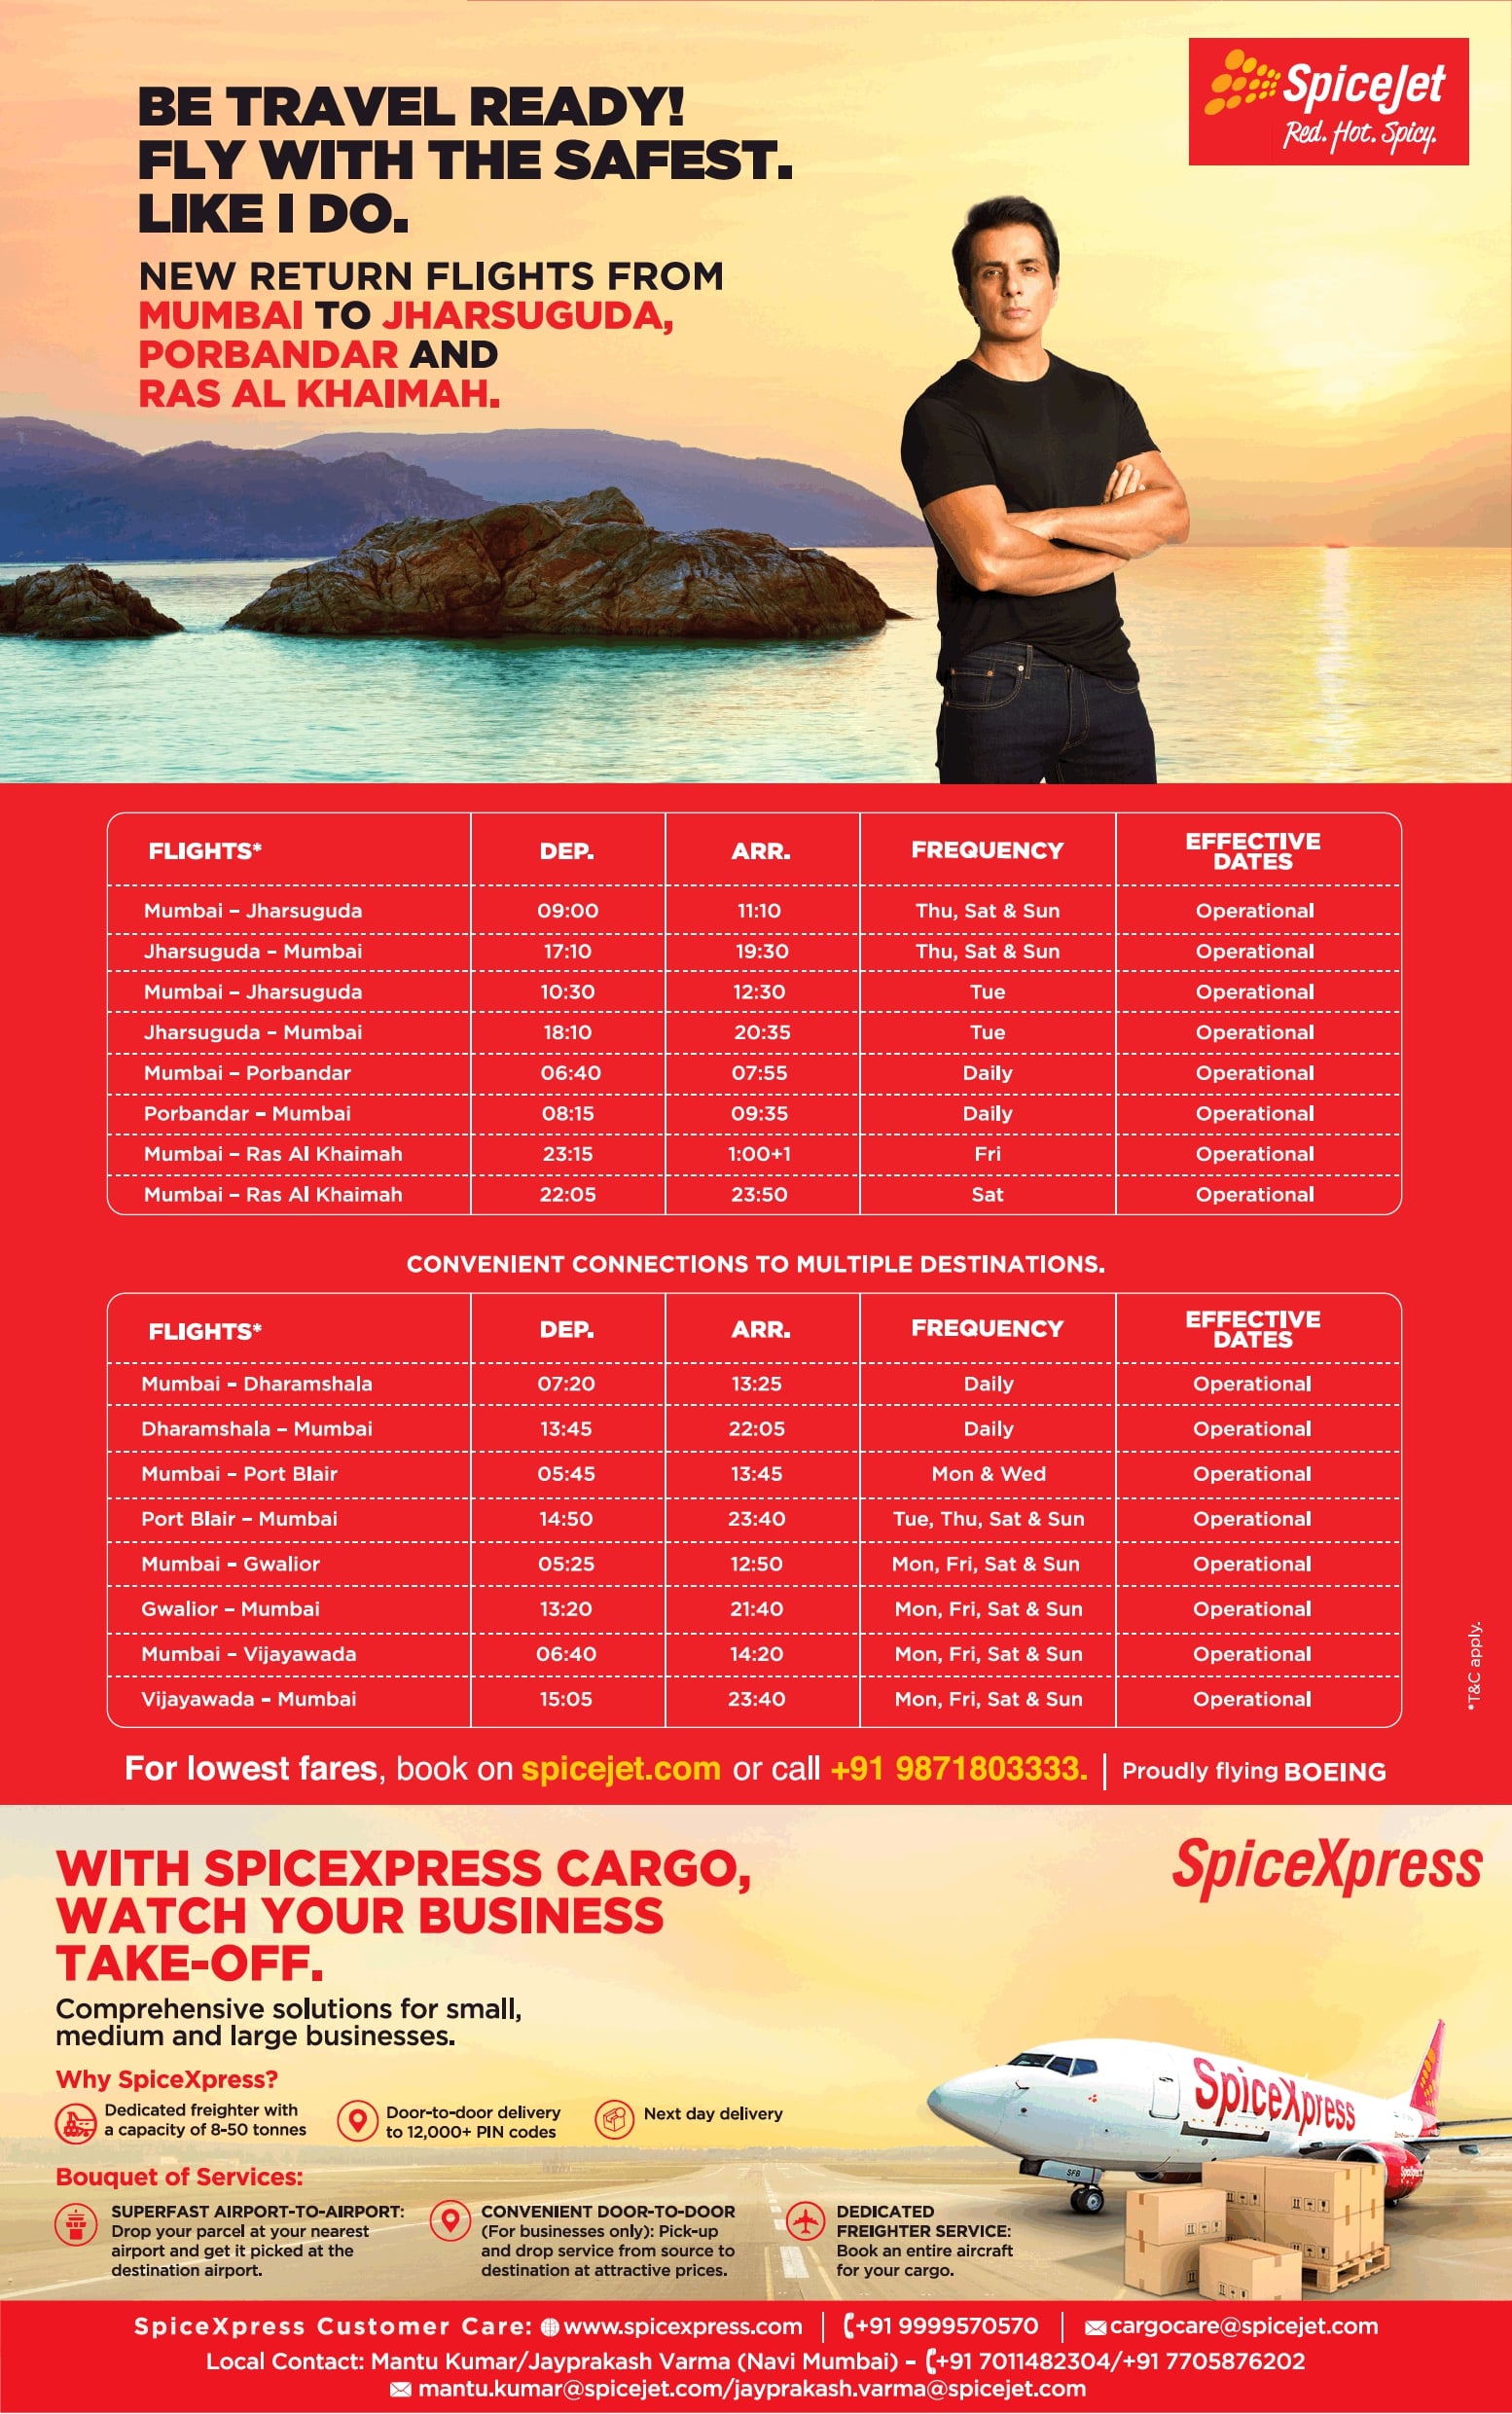 spicejet-spiceexprtess-cargo-be-travel-ready-ad-times-of-india-mumbai-04-02-2021